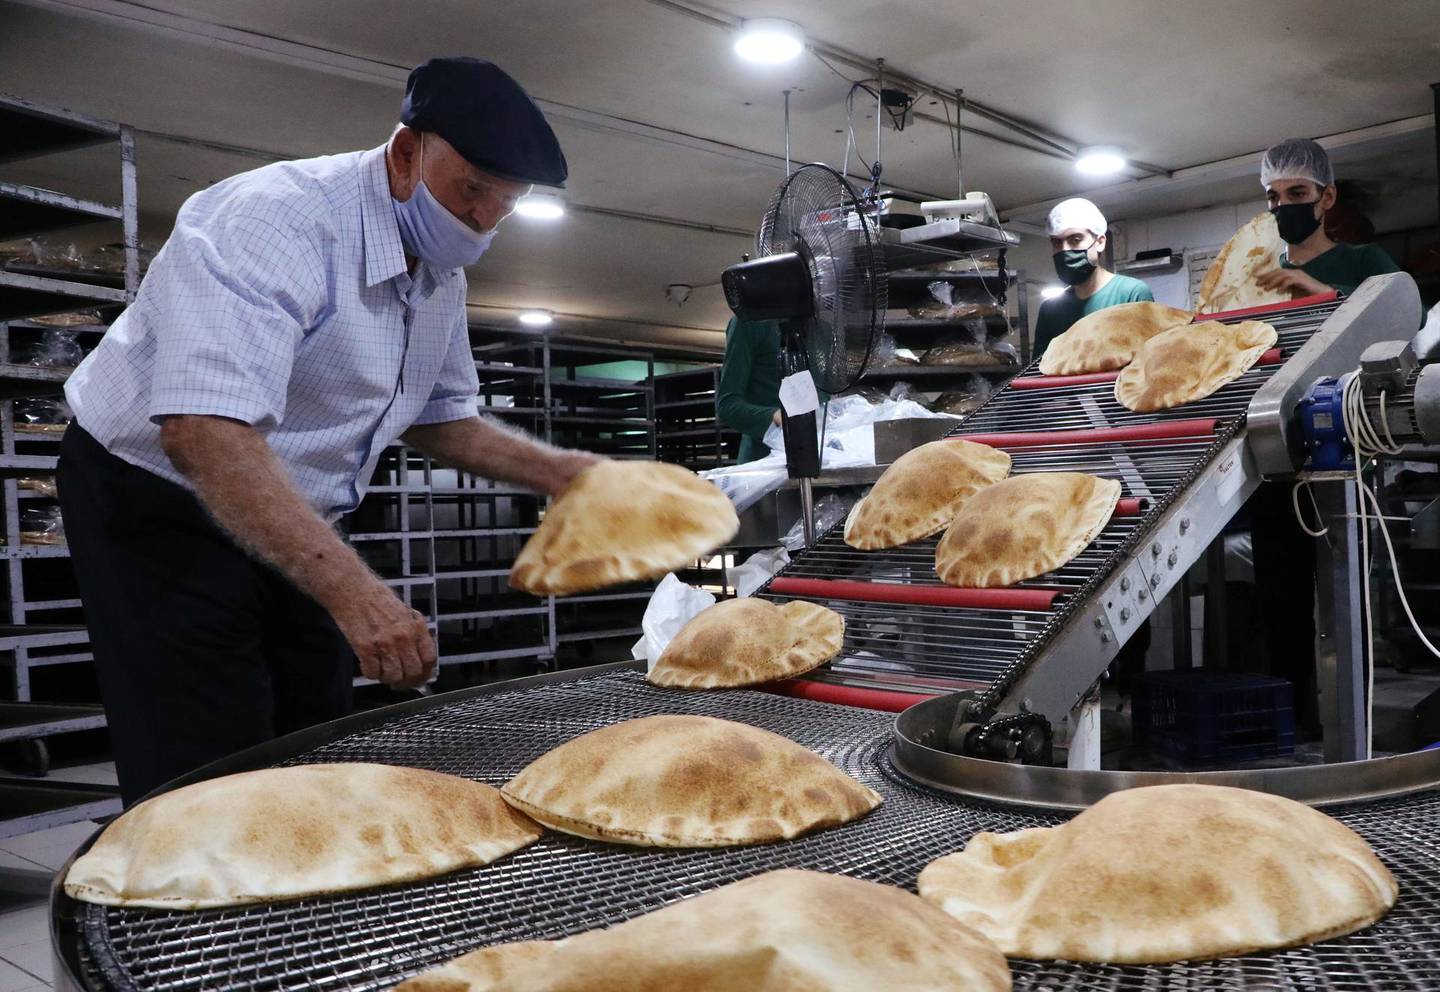 Workers wearing protective masks prepare baked breads inside a bakery in Beirut, Lebanon October 8, 2020. Picture taken October 8, 2020. REUTERS/Mohamed Azakir